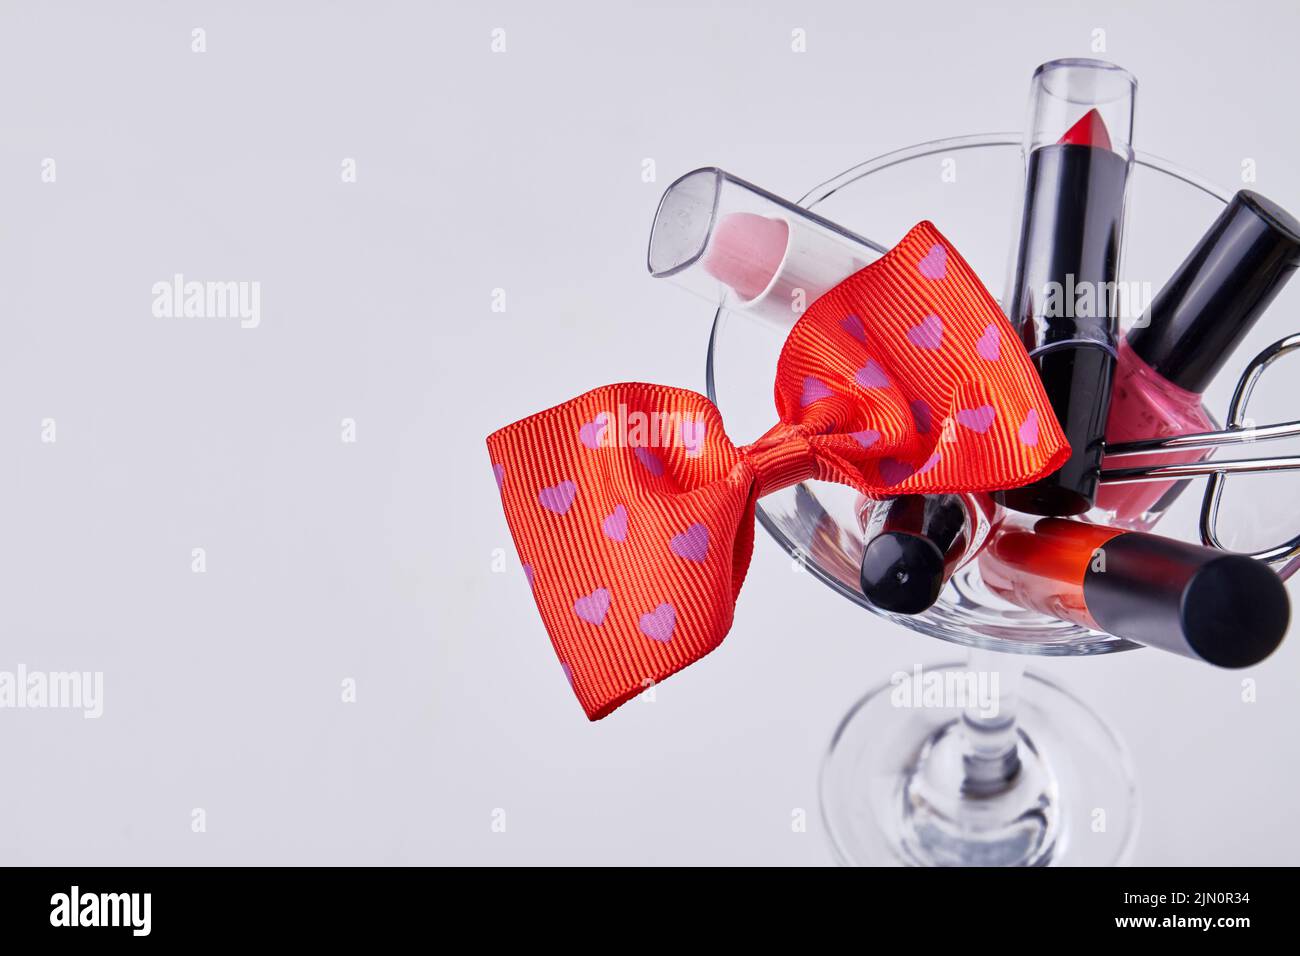 Close up makeup accessories and red bow tie. Isolated on white background. Stock Photo